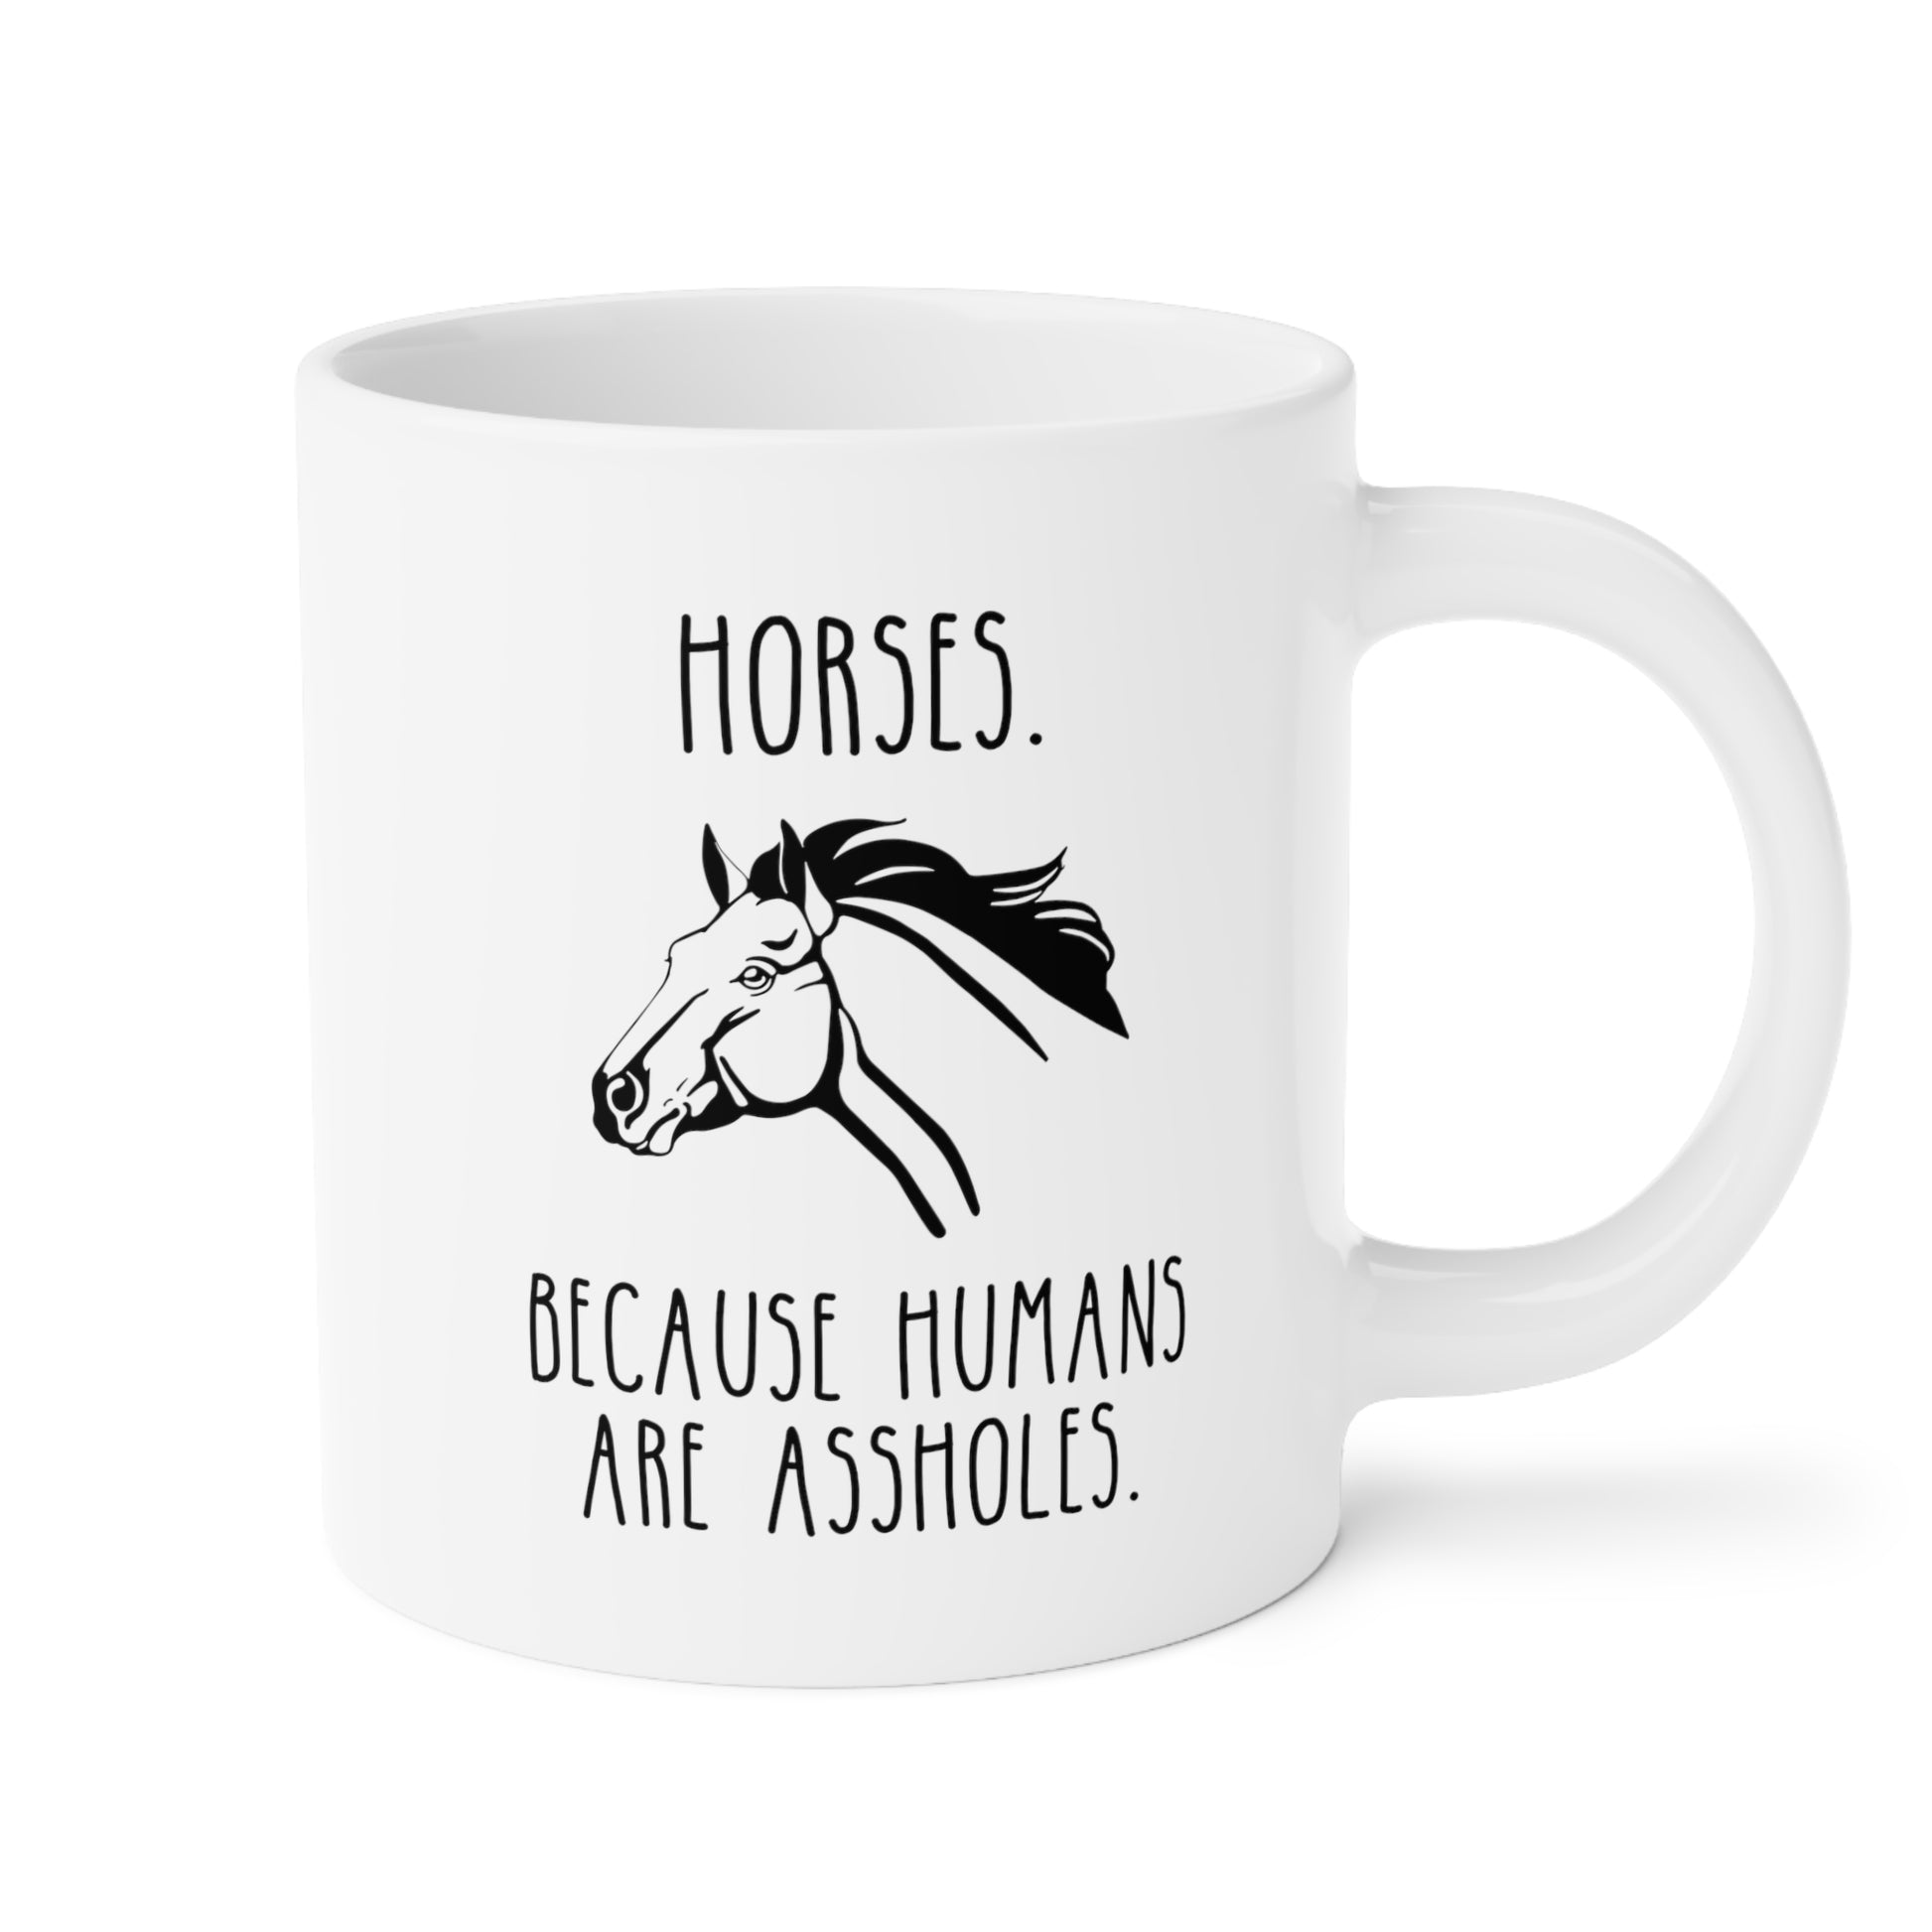 Horses Because Humans Are Assholes 20oz white funny large coffee mug gift for owner horse riding pony equestrian waveywares wavey wares wavywares wavy wares